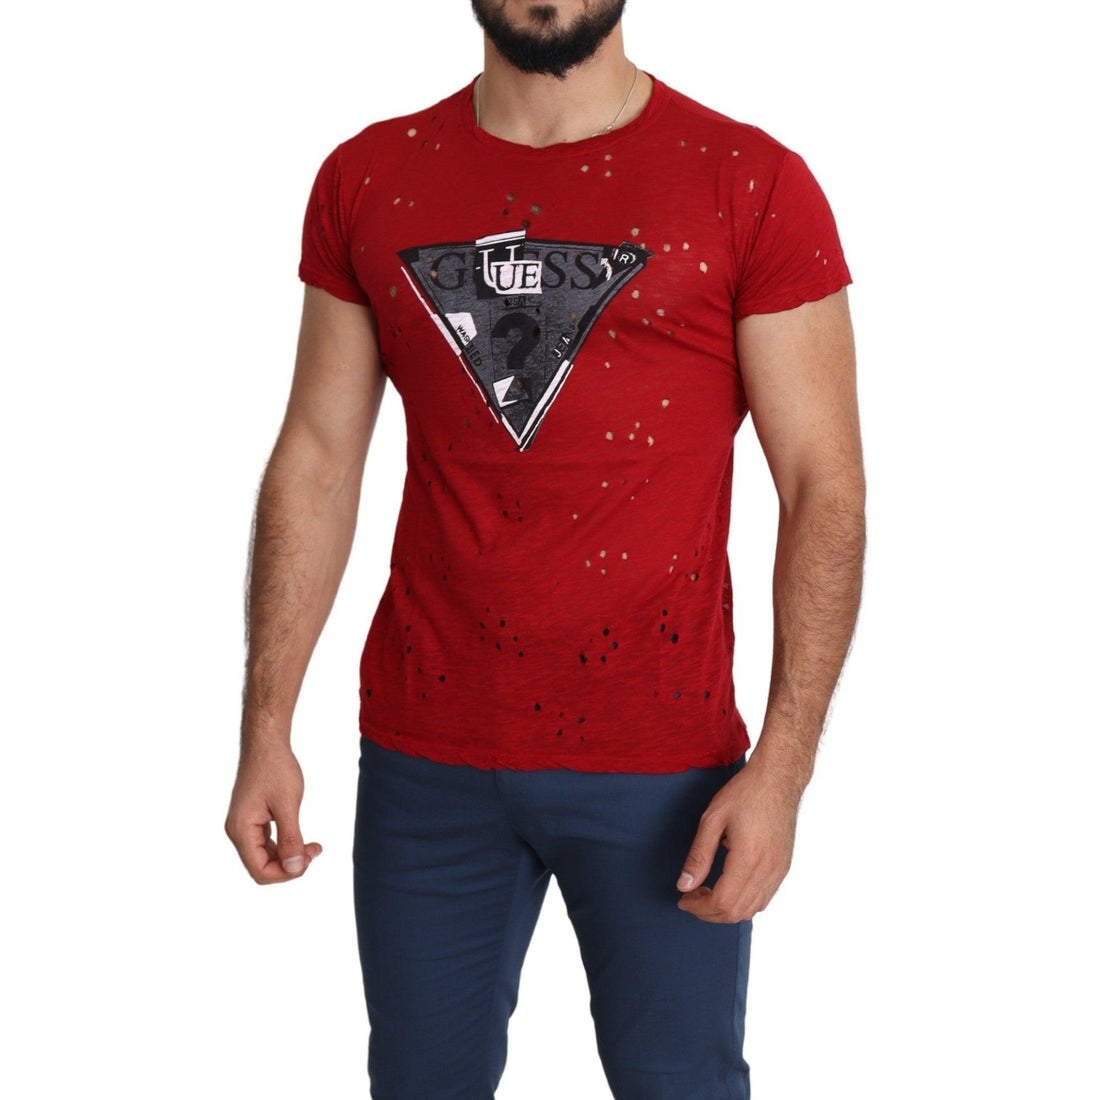 Guess Radiant Red Cotton Tee Perfect For Everyday Style